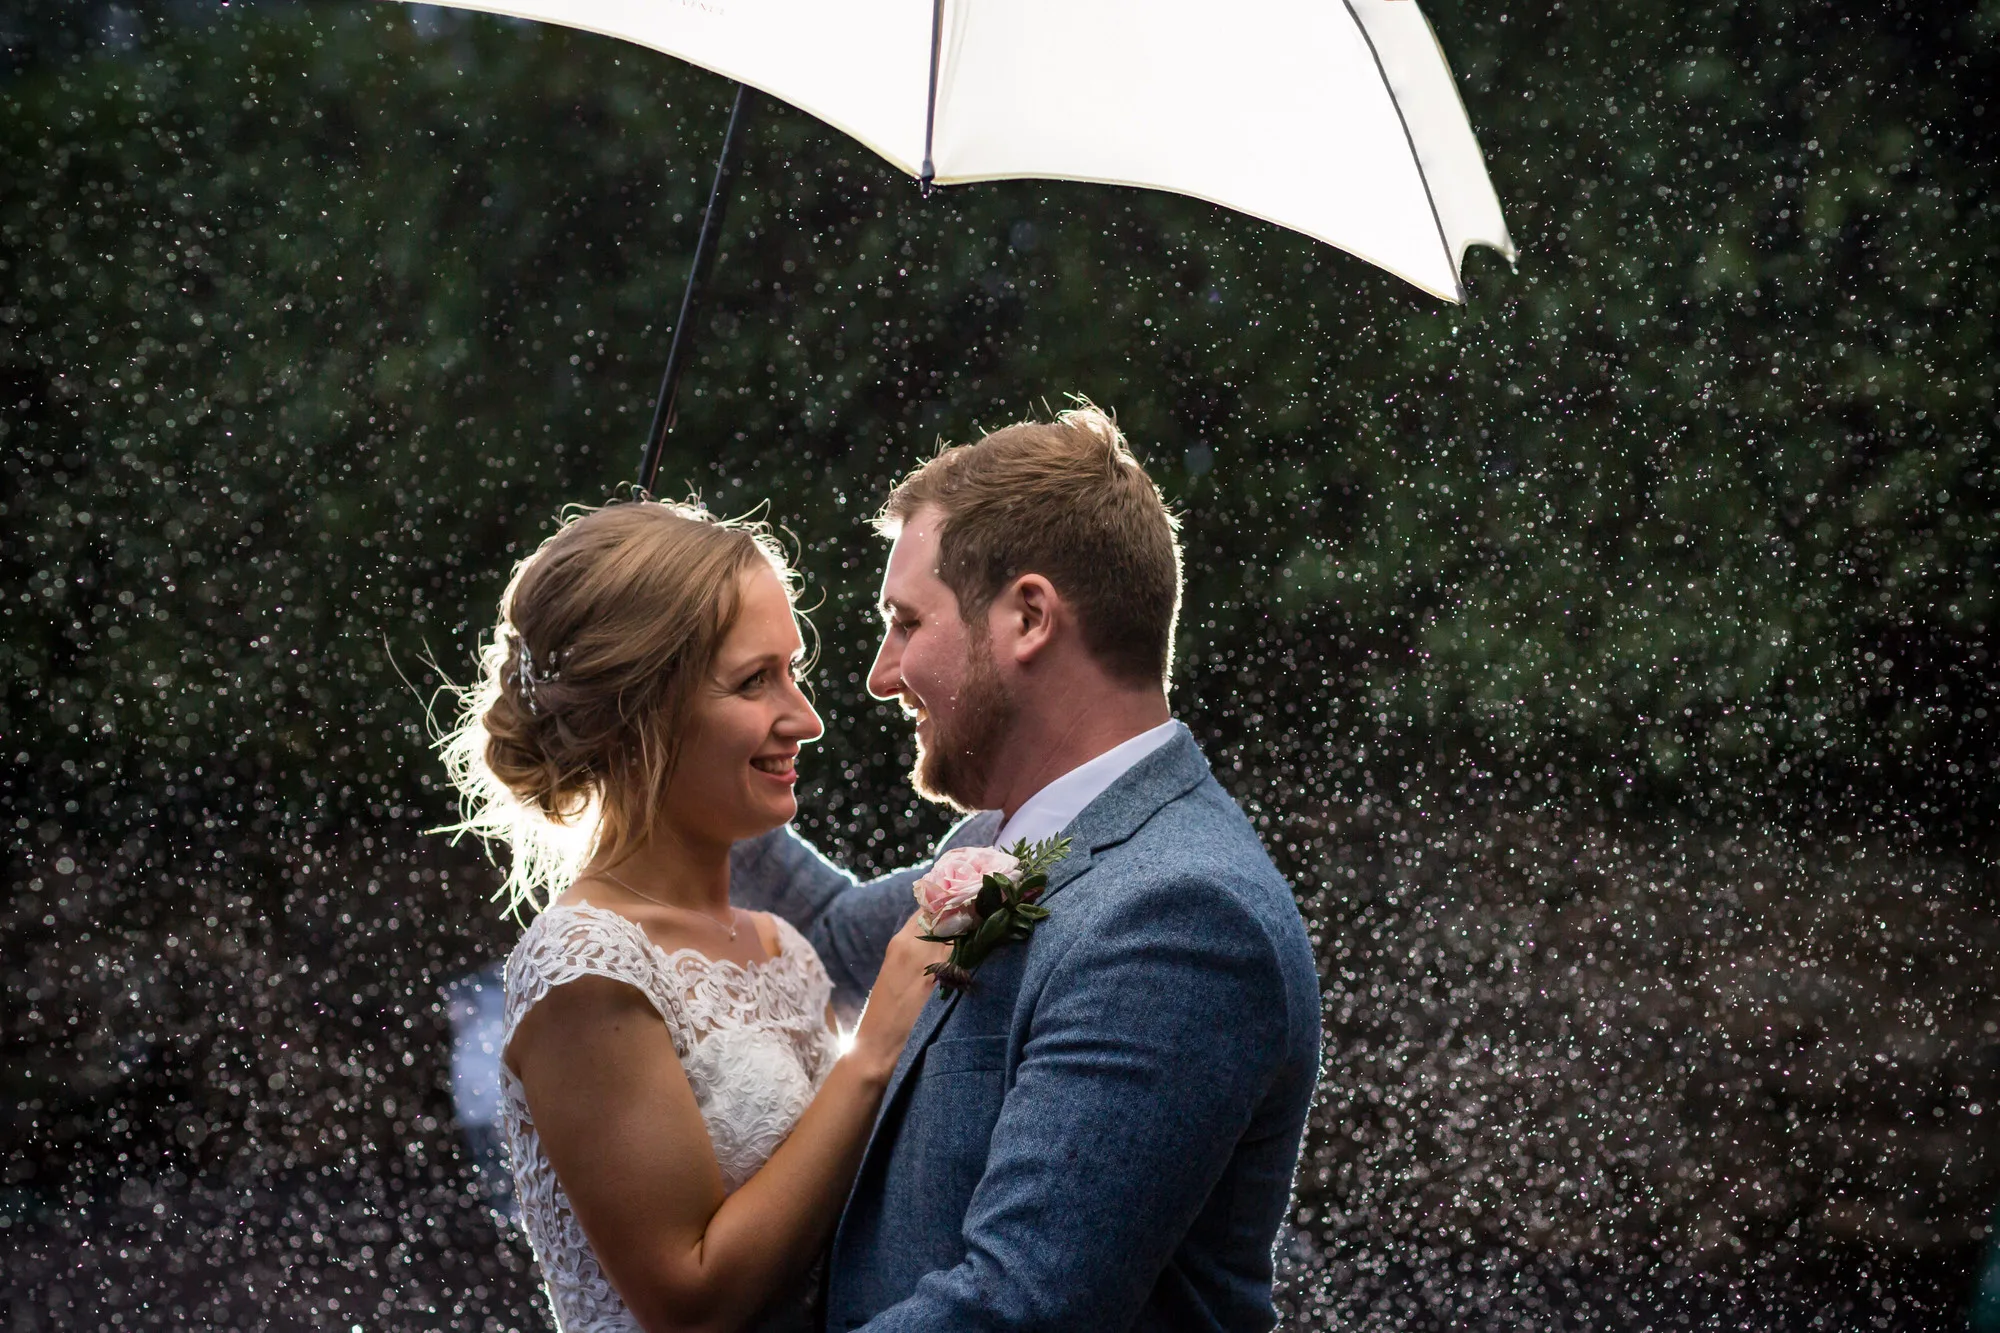 Sussex wedding photographer - a couple stand under a white umbrella in the rain at their wedding in West Sussex